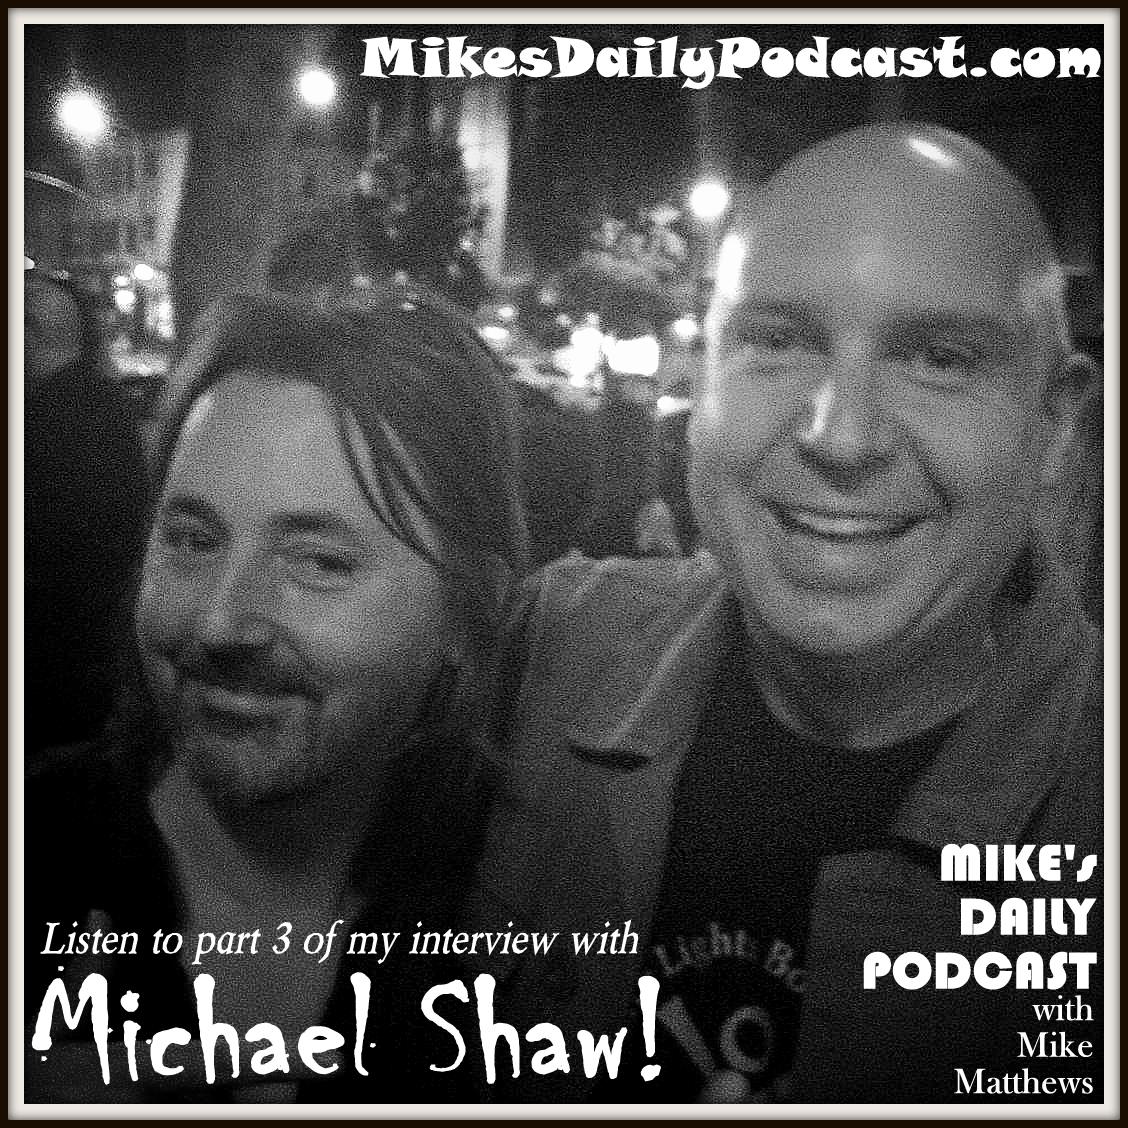 MIKEs DAILY PODCAST 8-10-15 An Intimate Evening with Michael Shaw